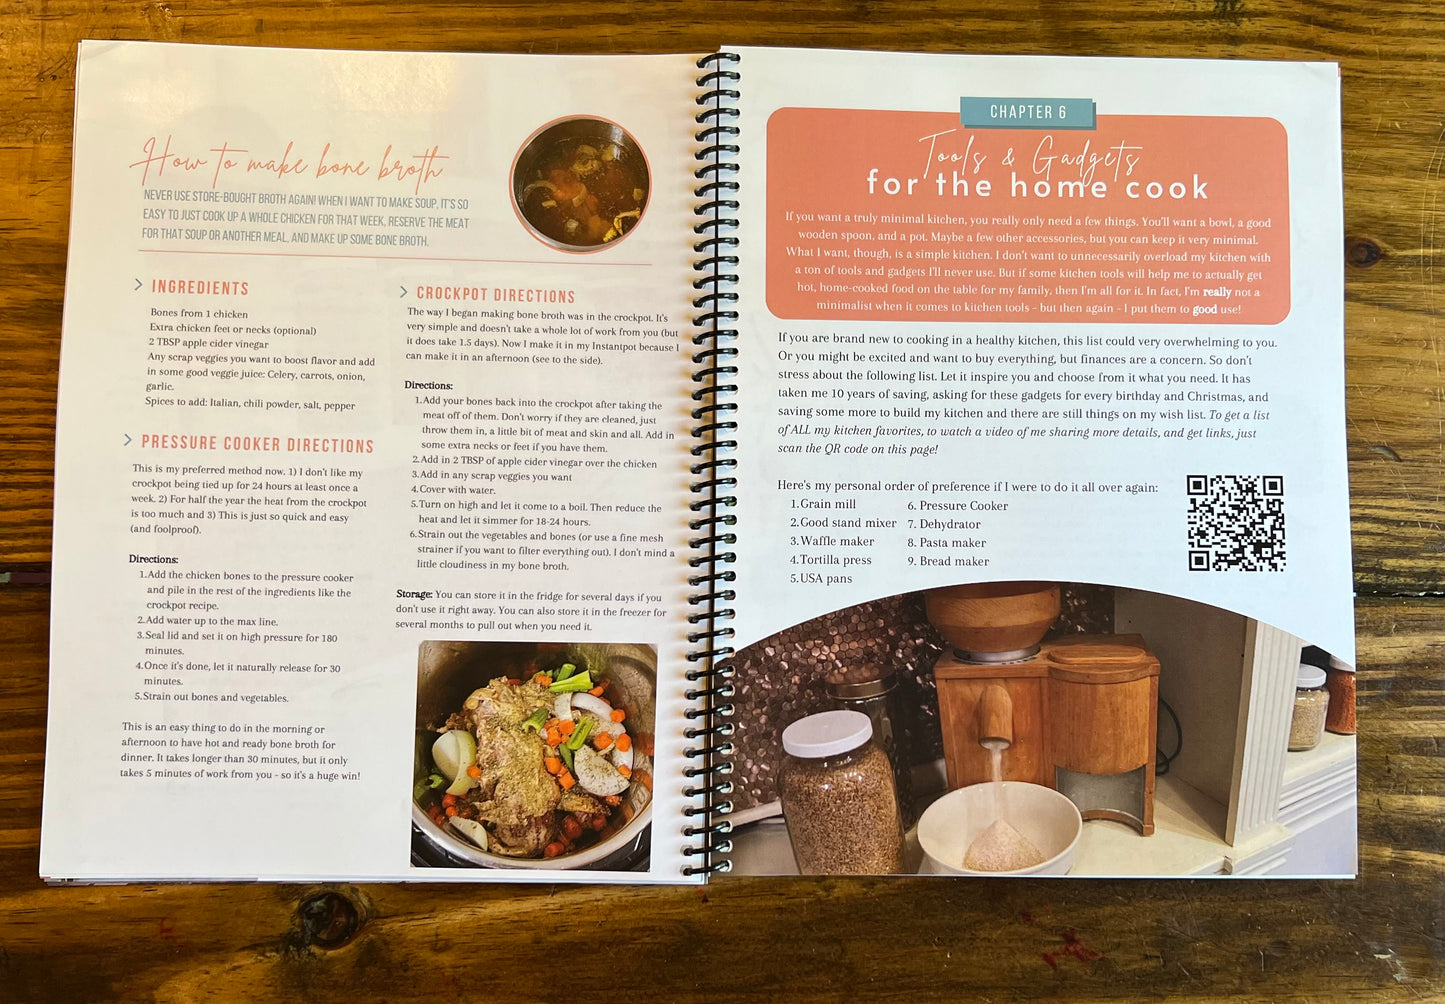 Cookbook Volume 1: Learn How to Cook From Scratch - PRINT